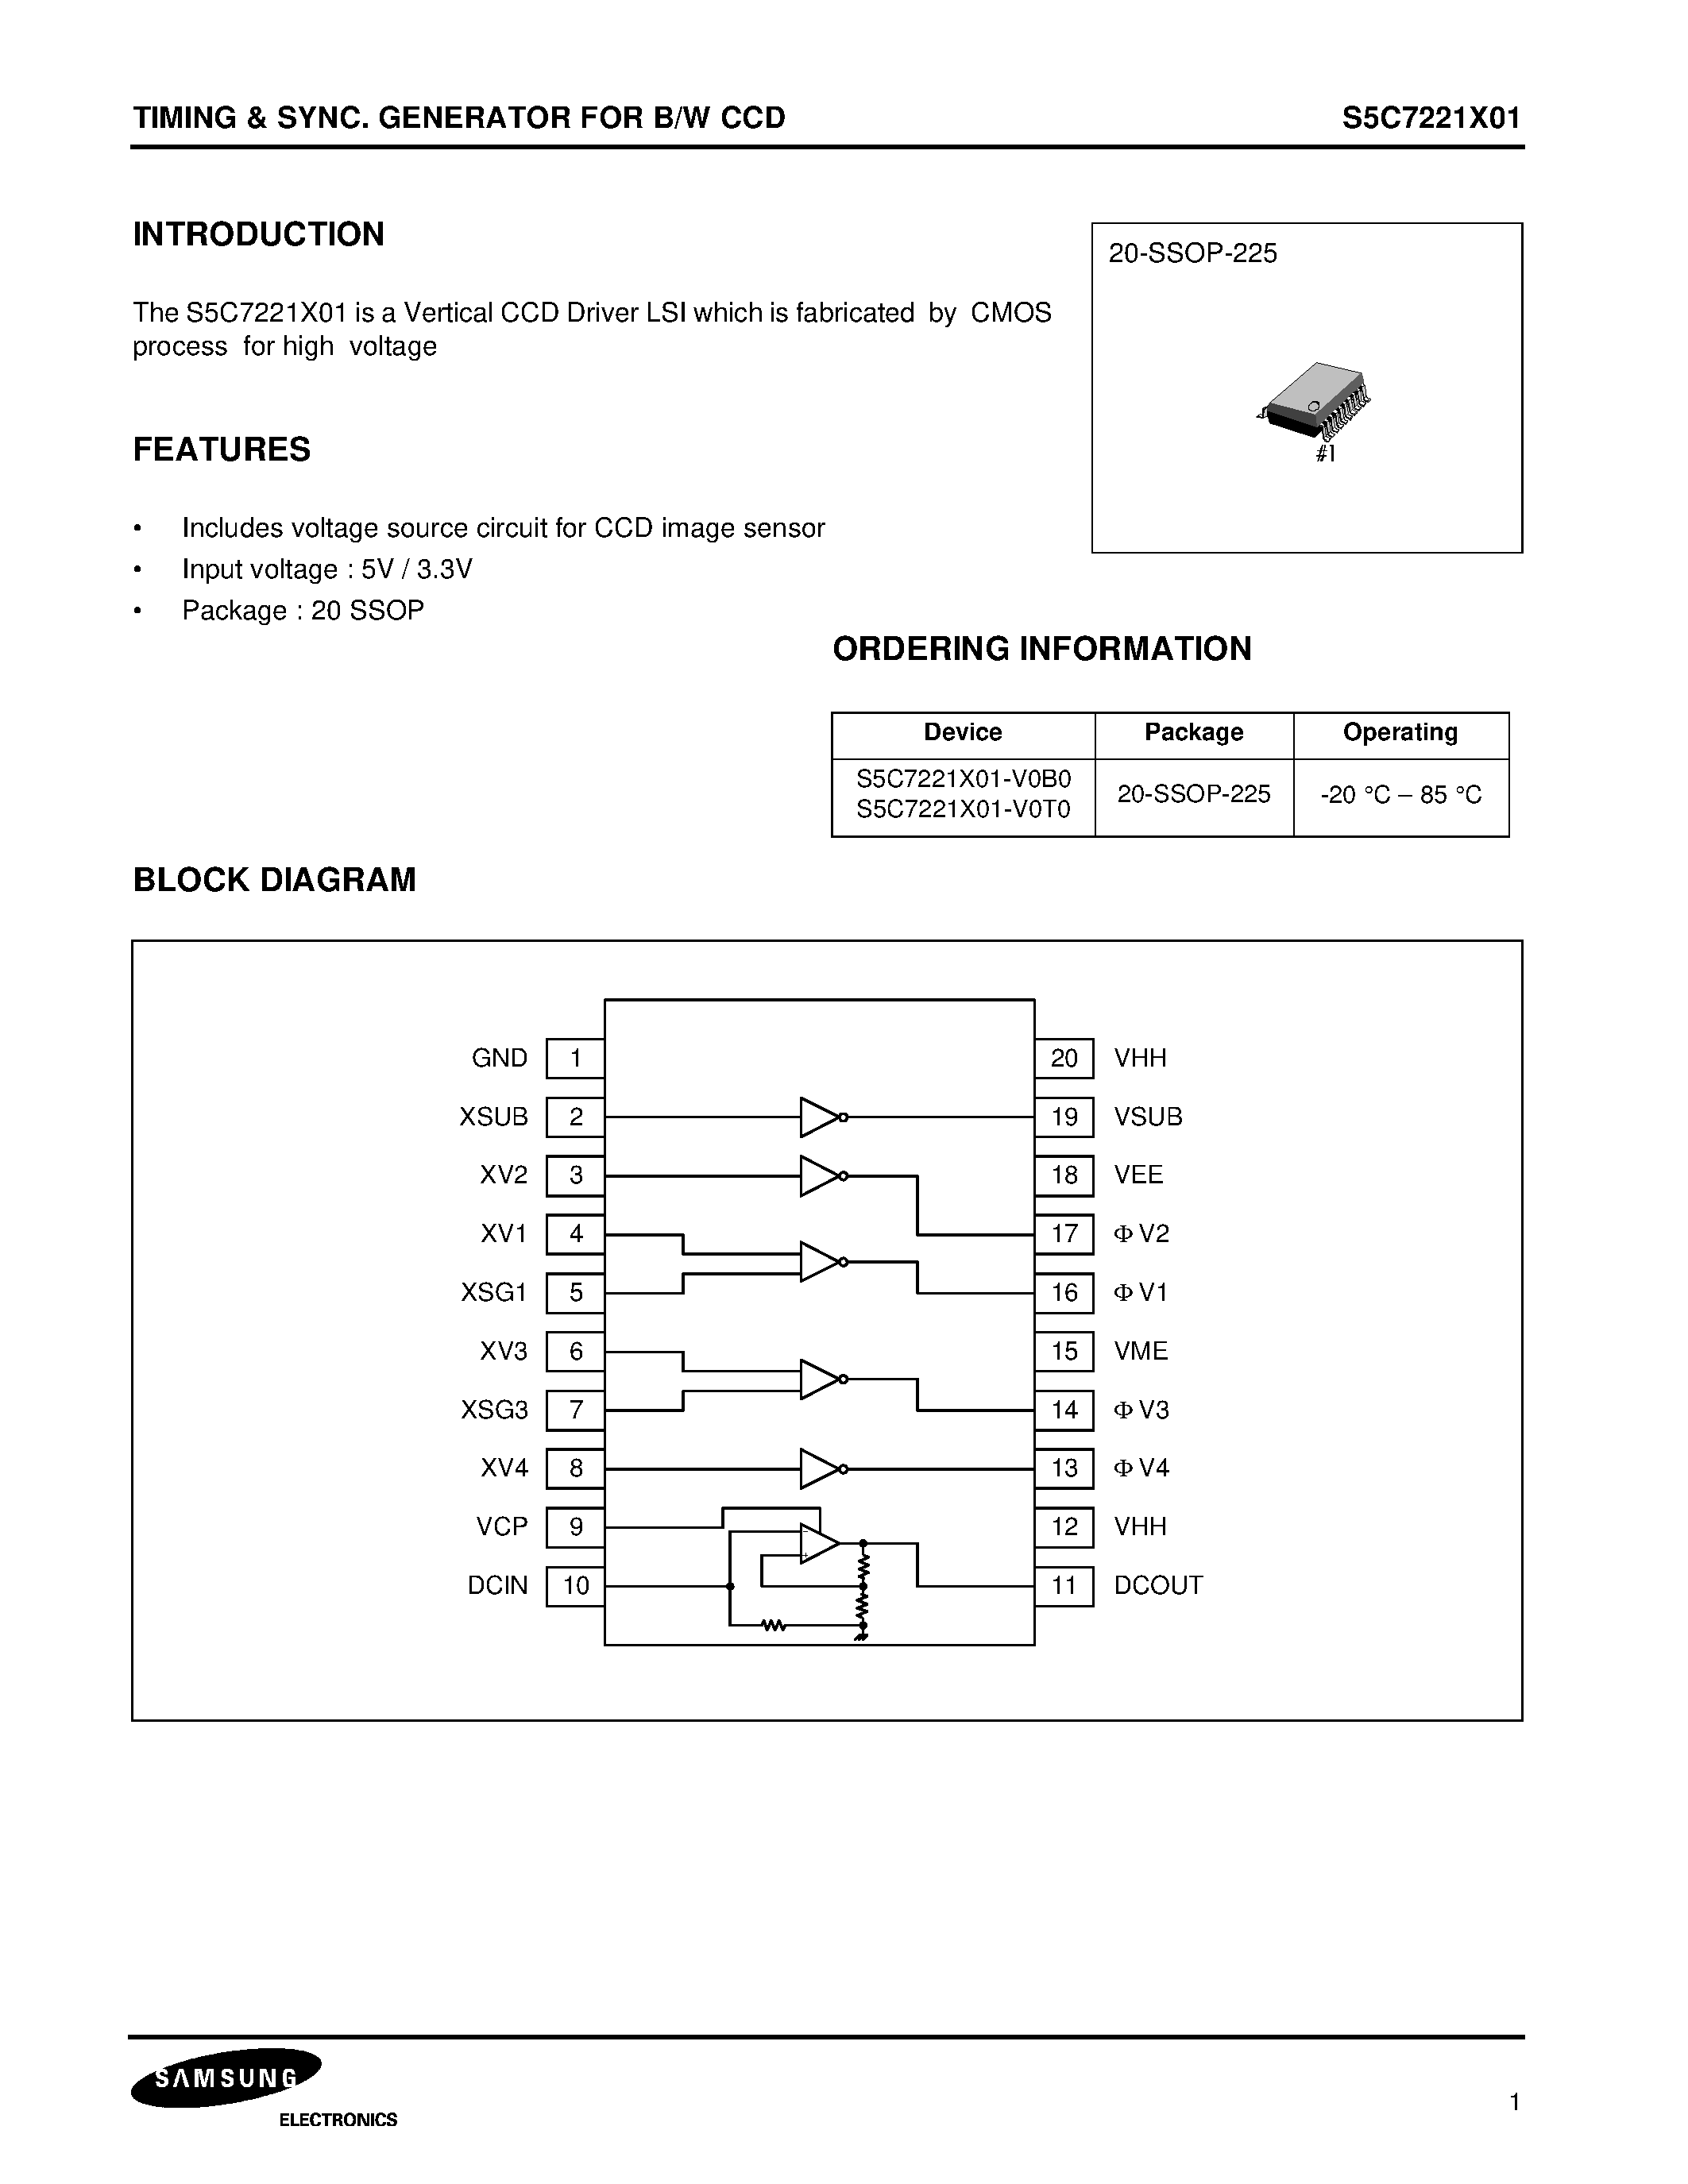 Datasheet S5C7221X01 - TIMING & SYNC. GENERATOR FOR B/W CCD page 1